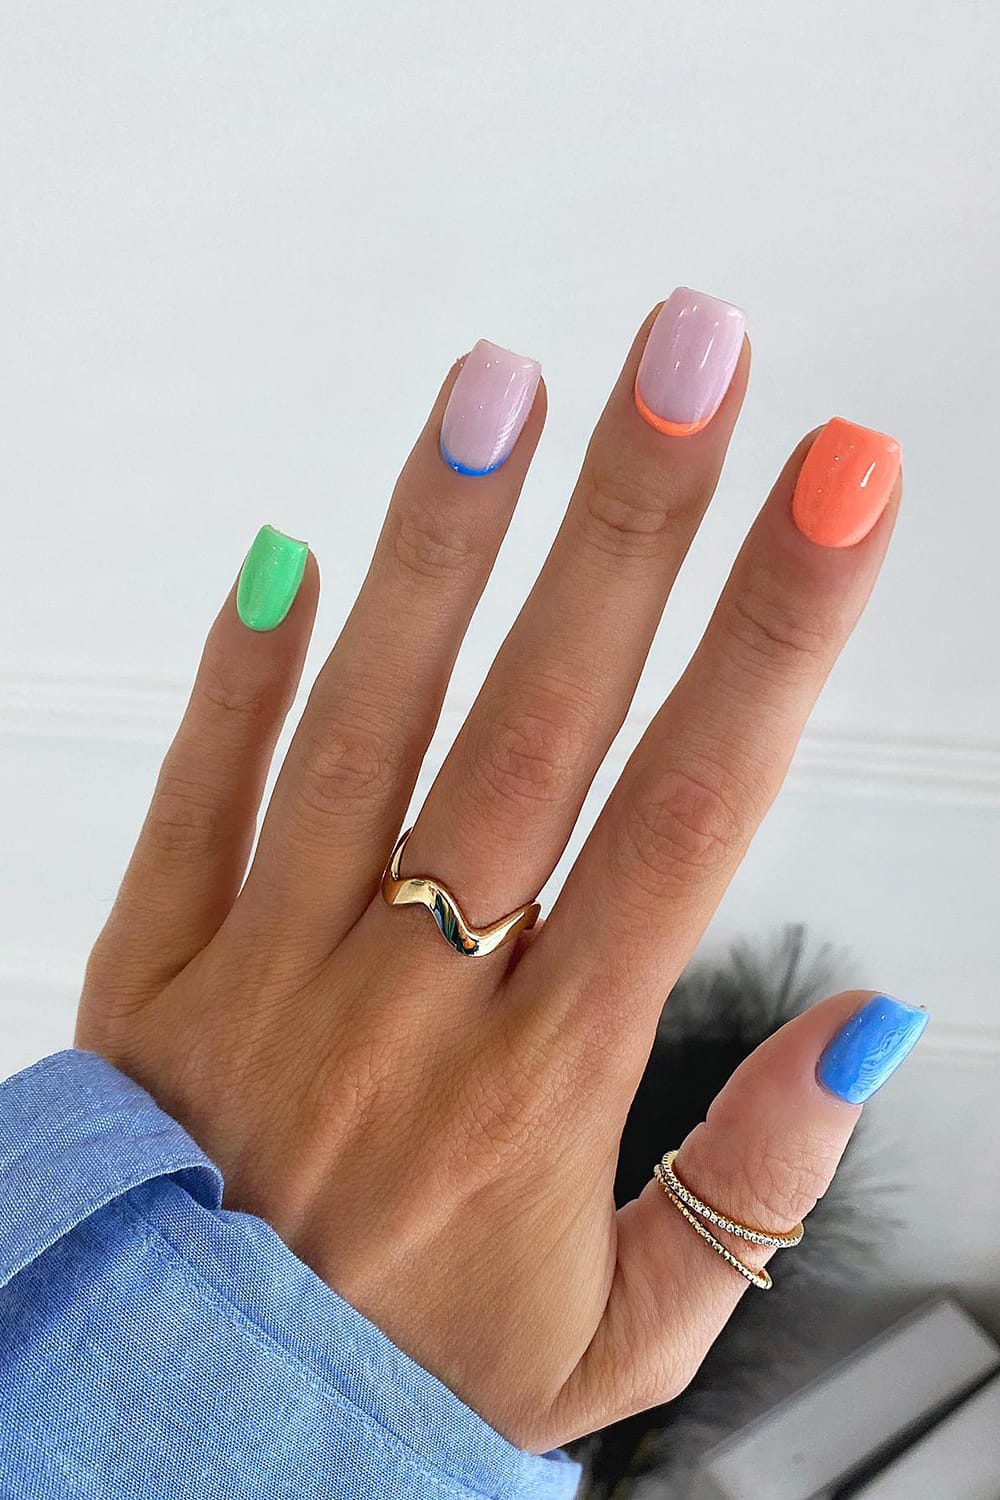 Colorful Reverse French Manicure